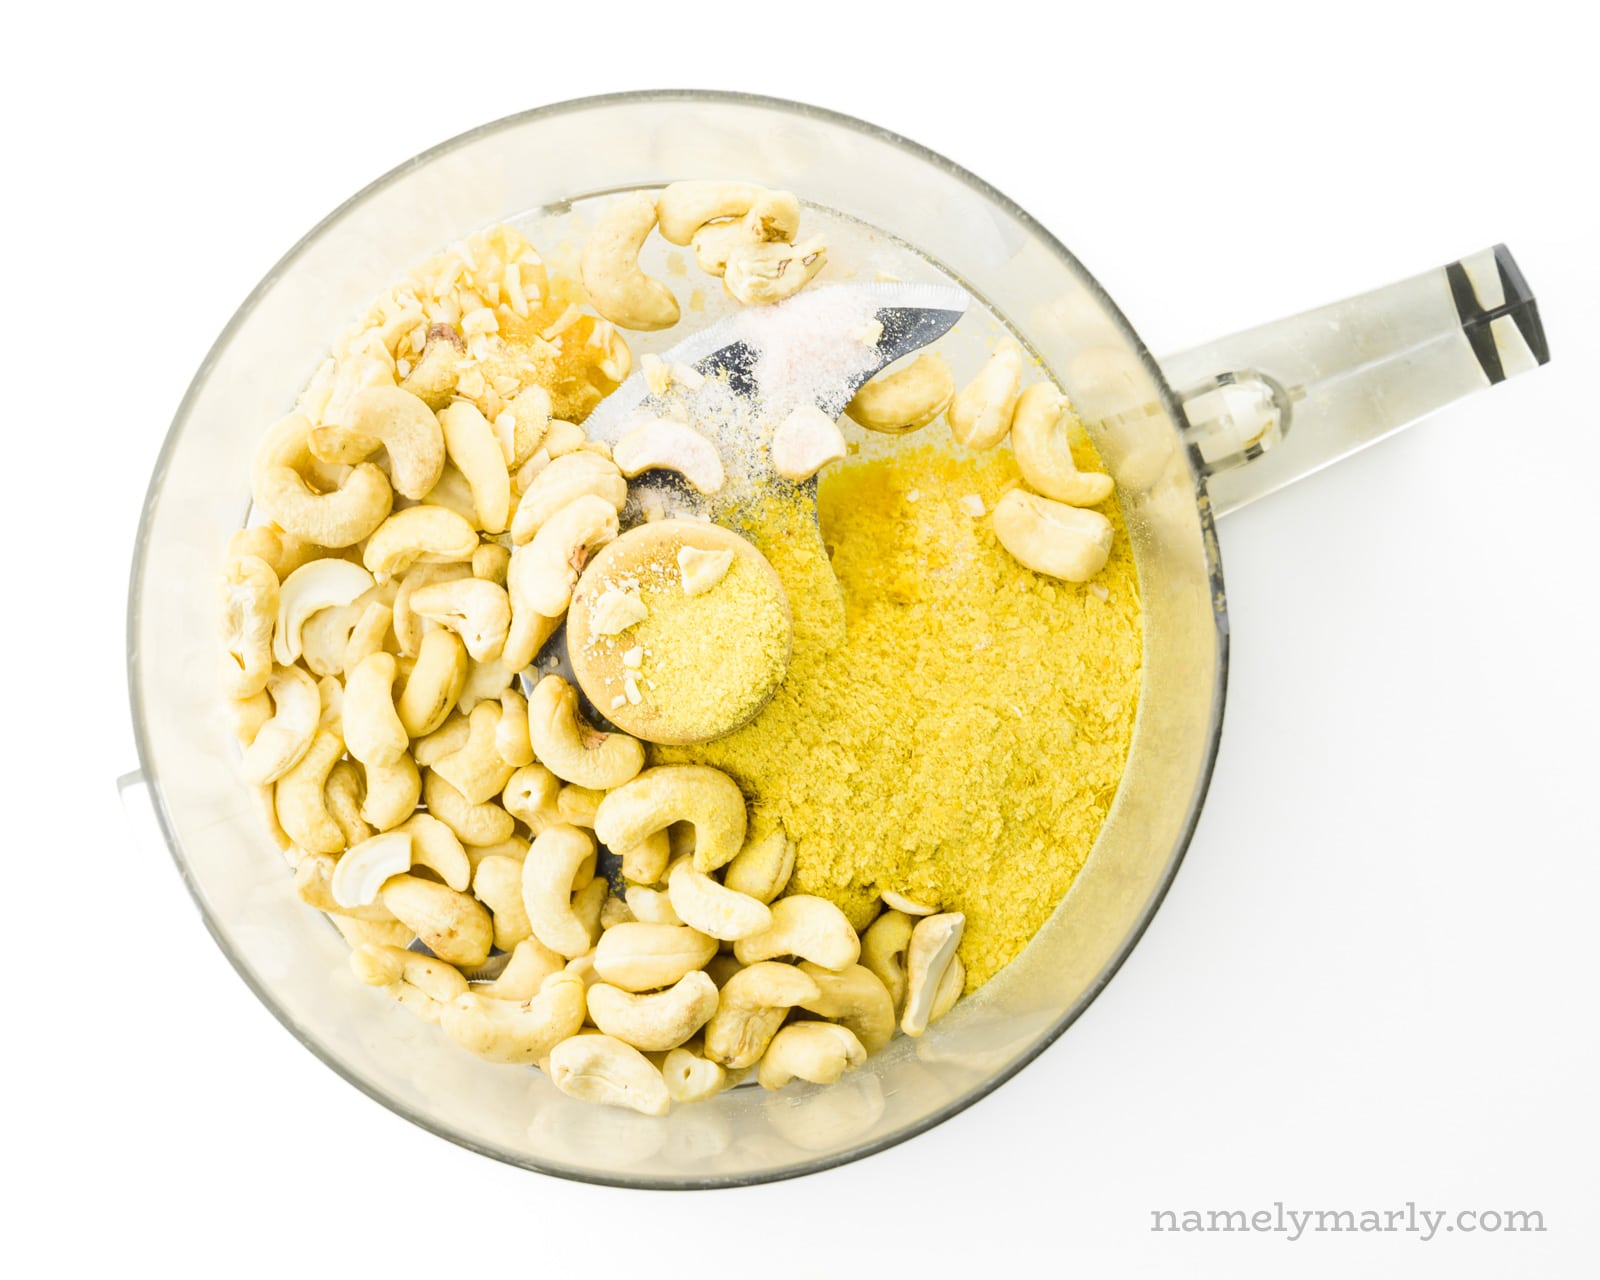 Cashews, nutritional yeast flakes, and spices are in the bowl of a food processor.